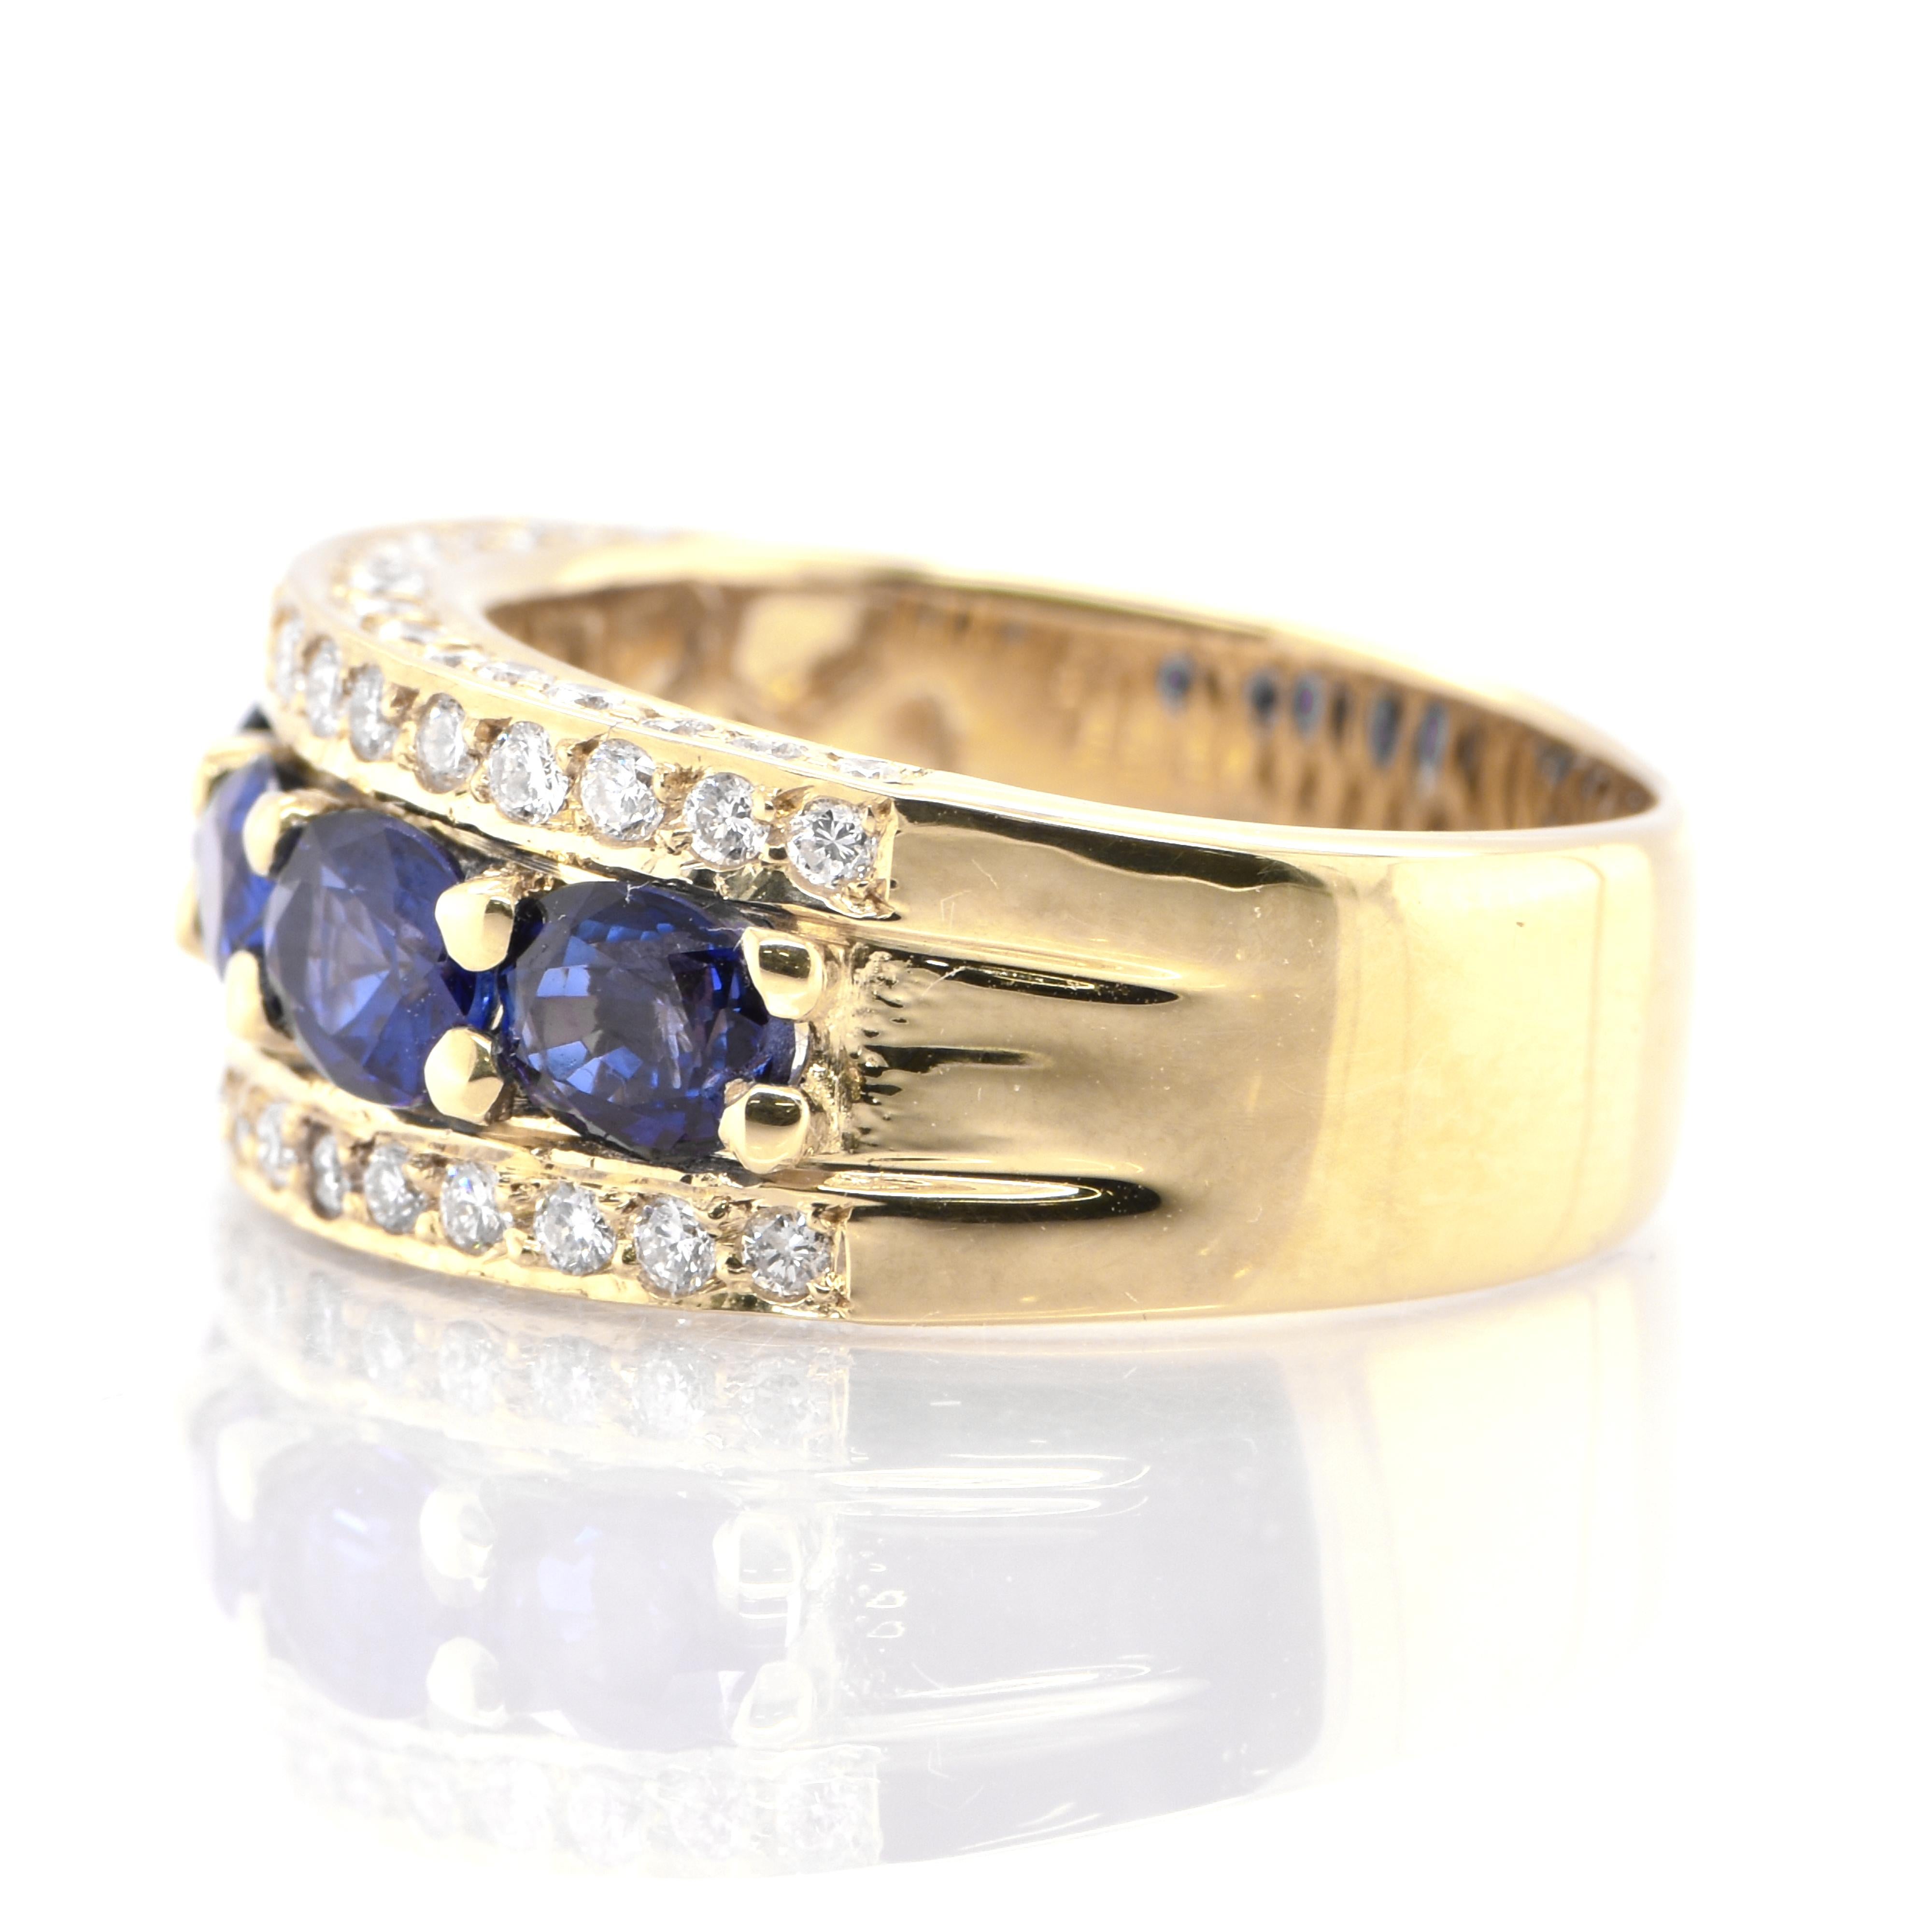 Modern Natural Oval Cut Sapphires and Diamond Half Eternity Band Ring Set in 18K Gold